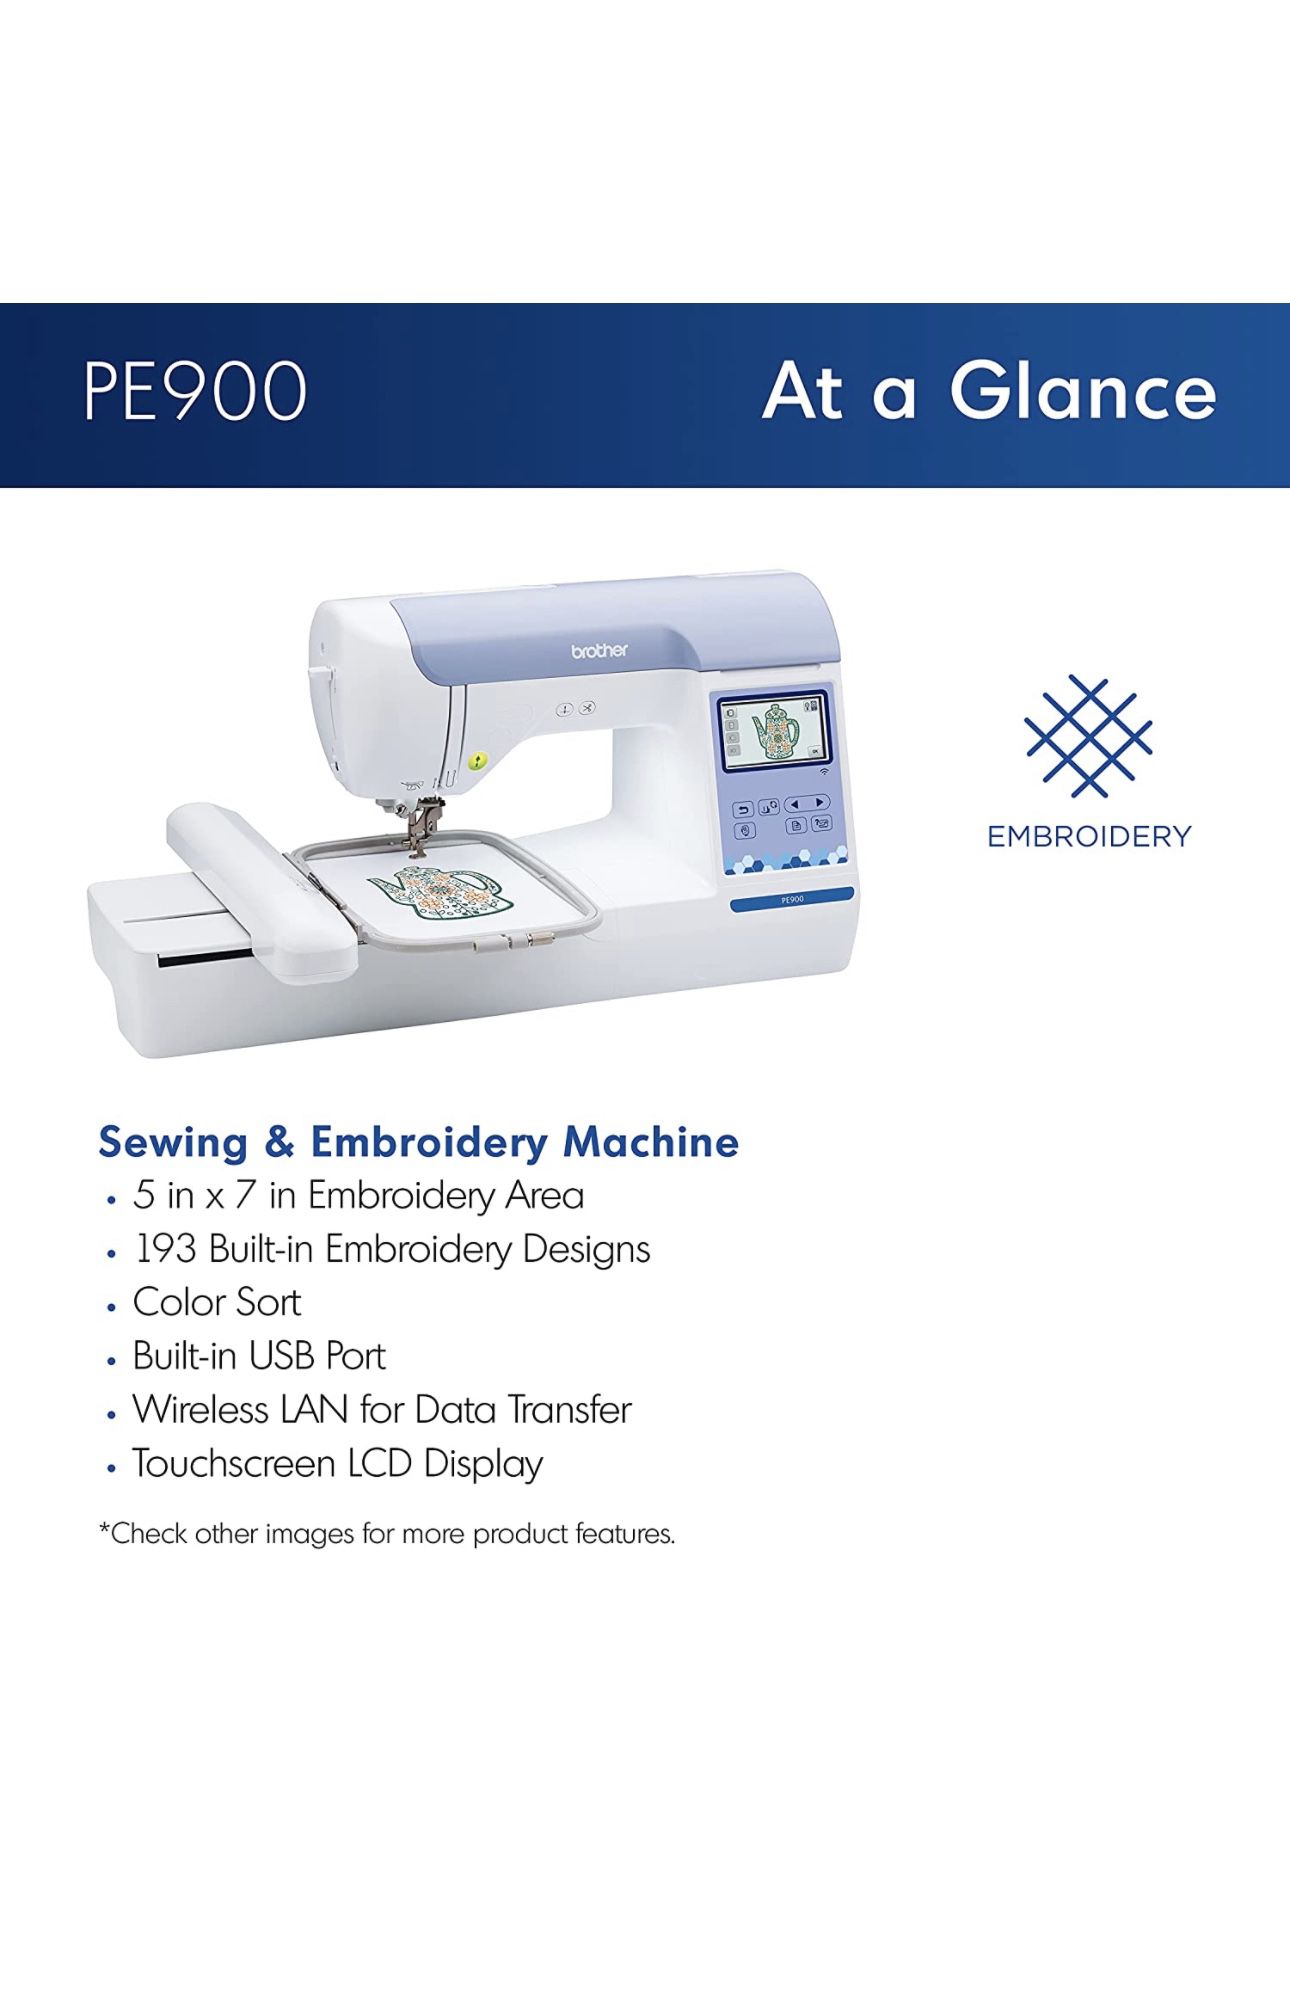 Unboxing Brother PE900 Embroidery Machine 